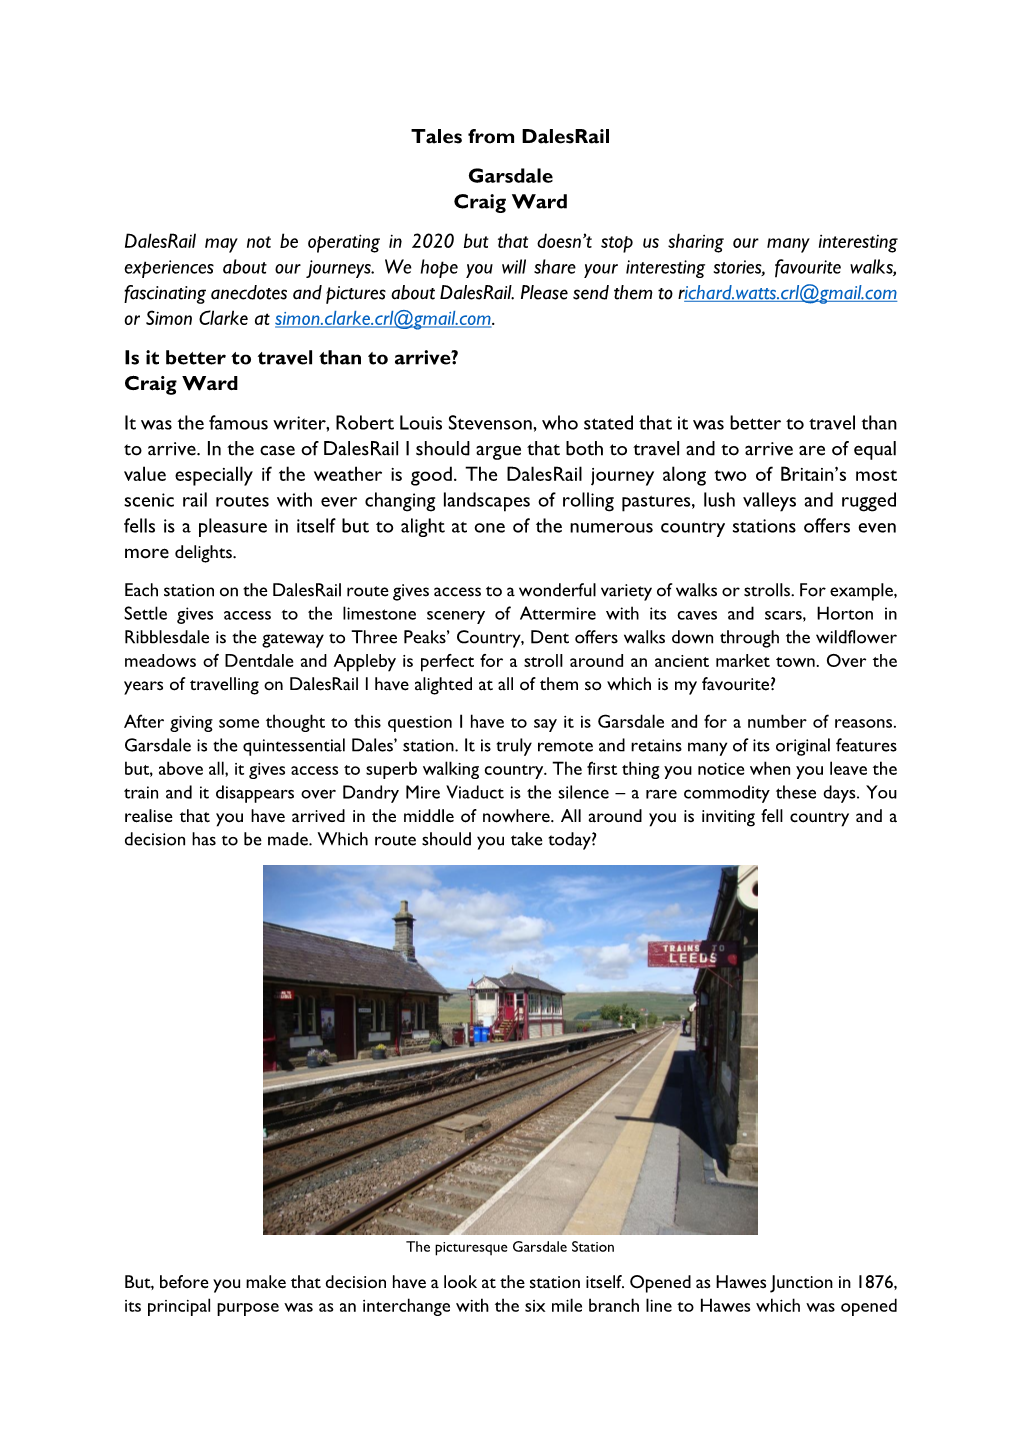 Tales from Dalesrail Garsdale Craig Ward Dalesrail May Not Be Operating in 2020 but That Doesn't Stop Us Sharing Our Many Inte